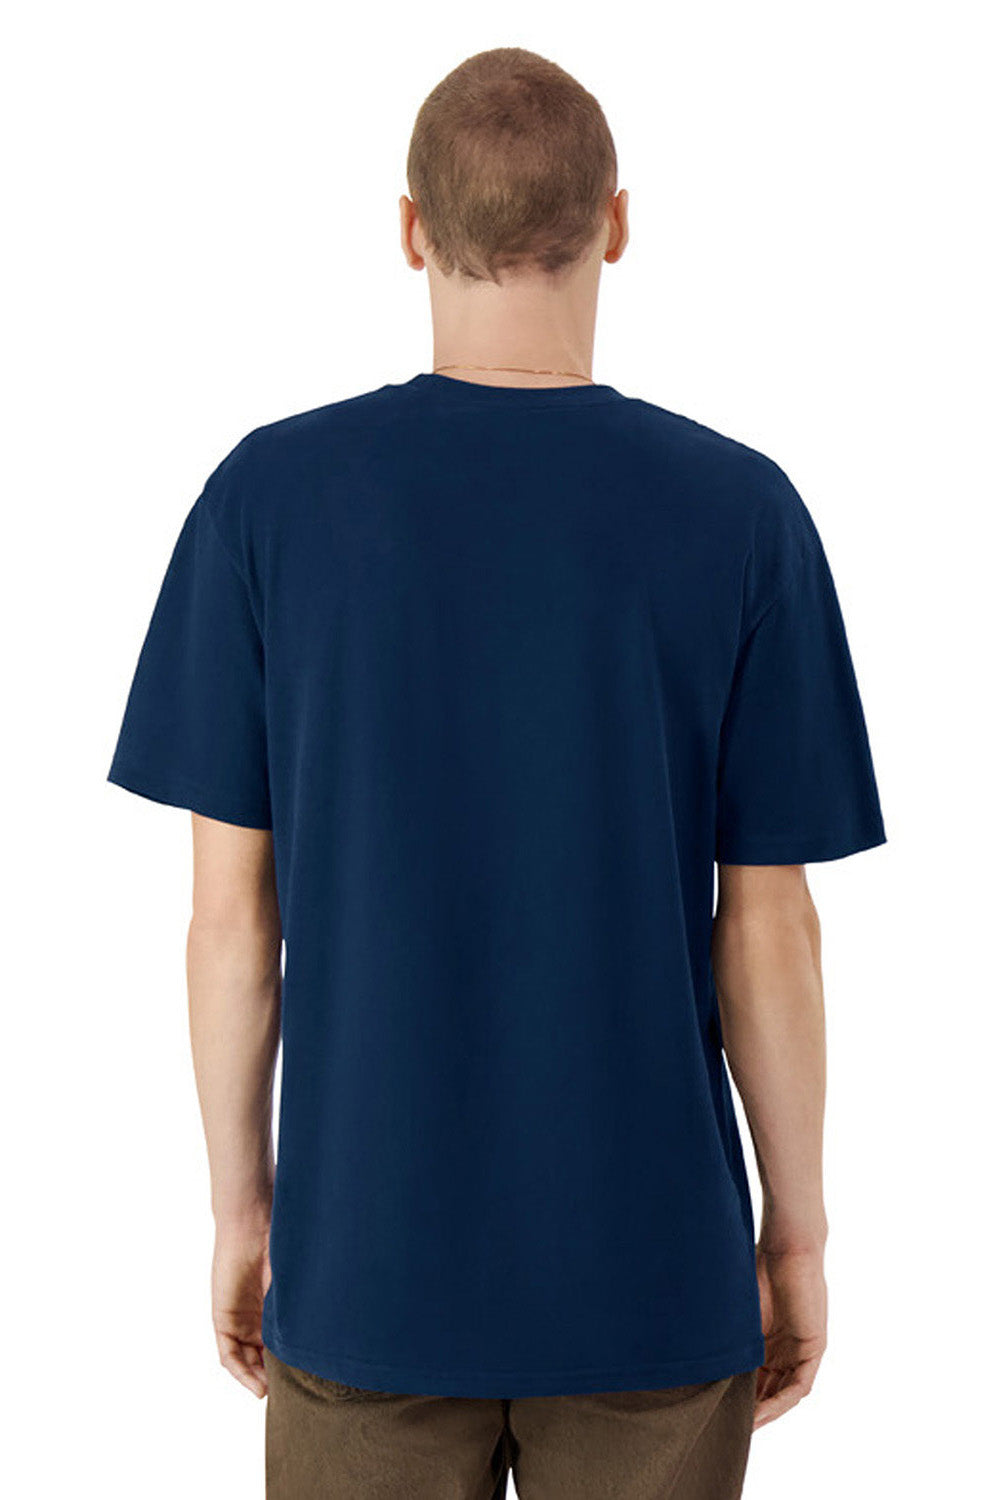 American Apparel 5389 Mens Sueded Cloud Short Sleeve Crewneck T-Shirt Sueded Navy Model Back